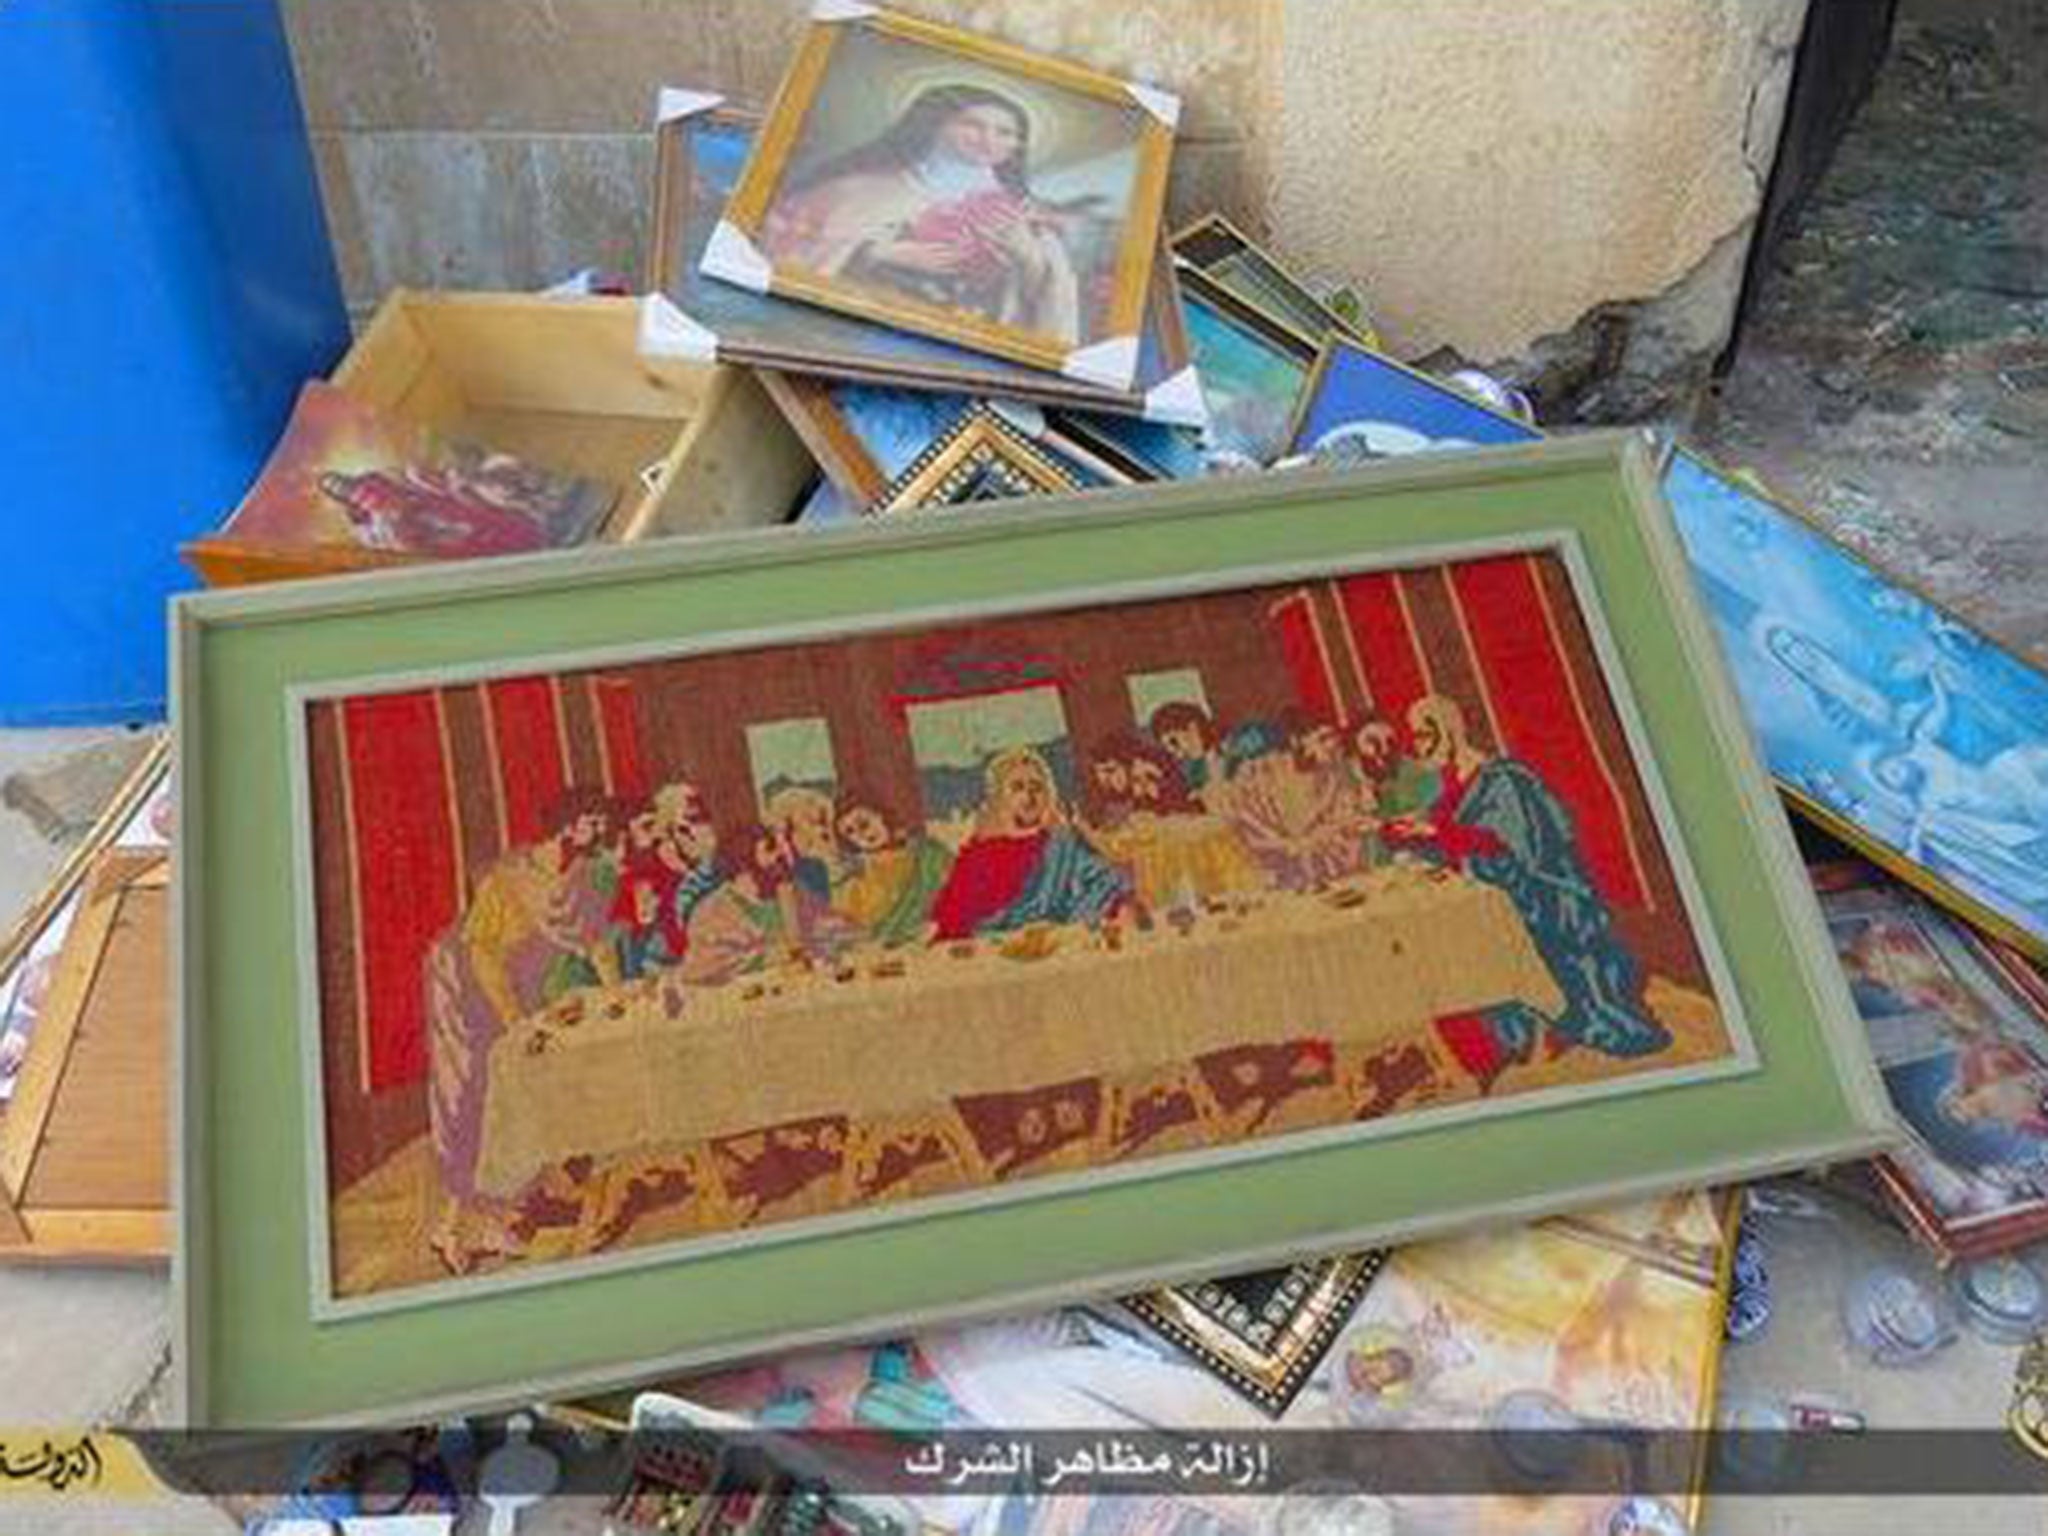 Pictures of the Last Supper and other biblical images were seen piled up